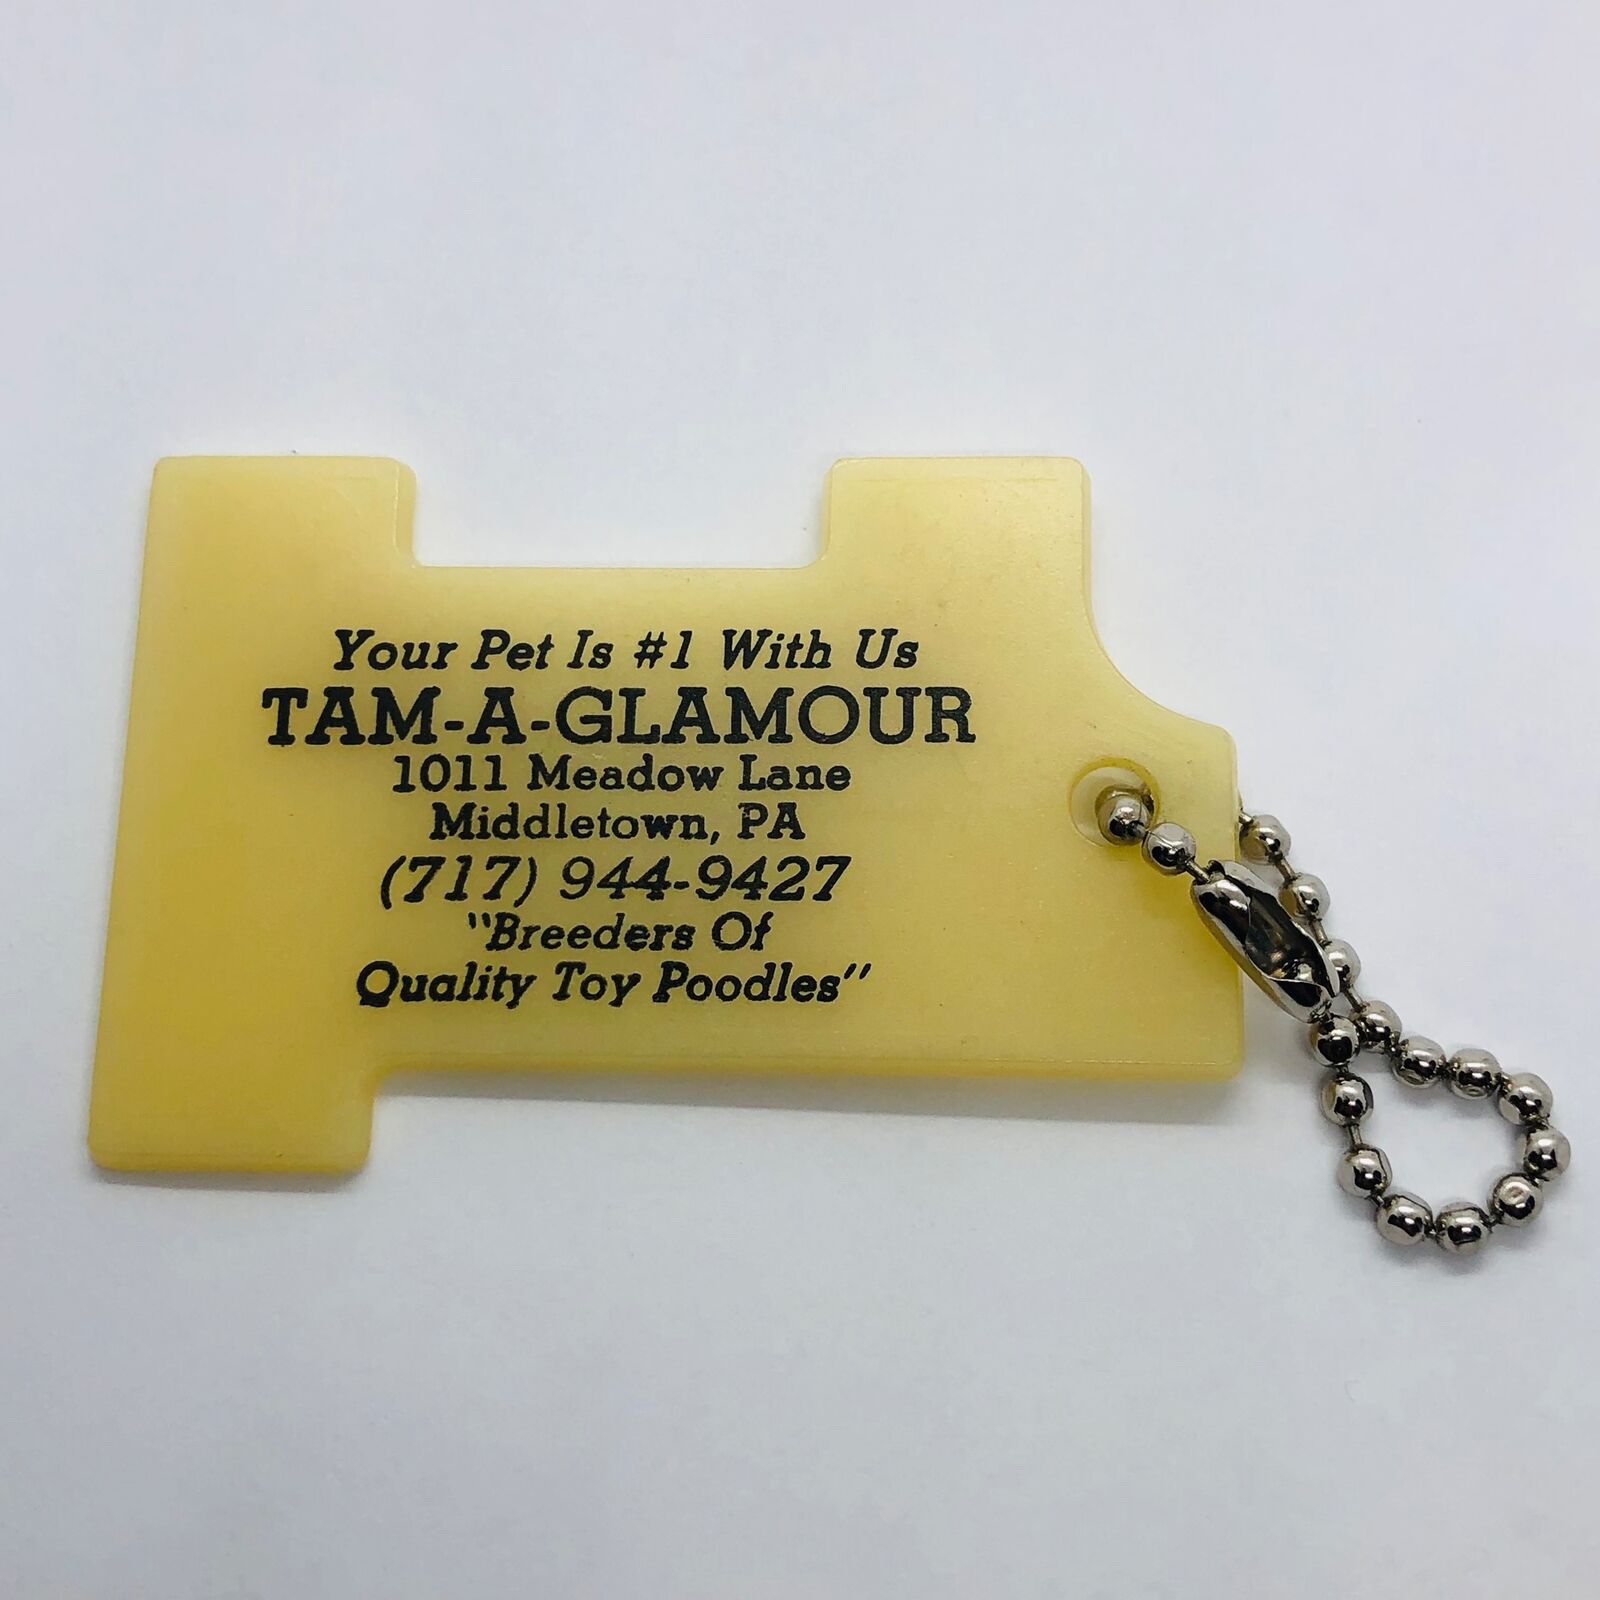 Vtg Tam-A-Glamour #1 Glow in Dark Pet Advertising Keychain Middletown PA